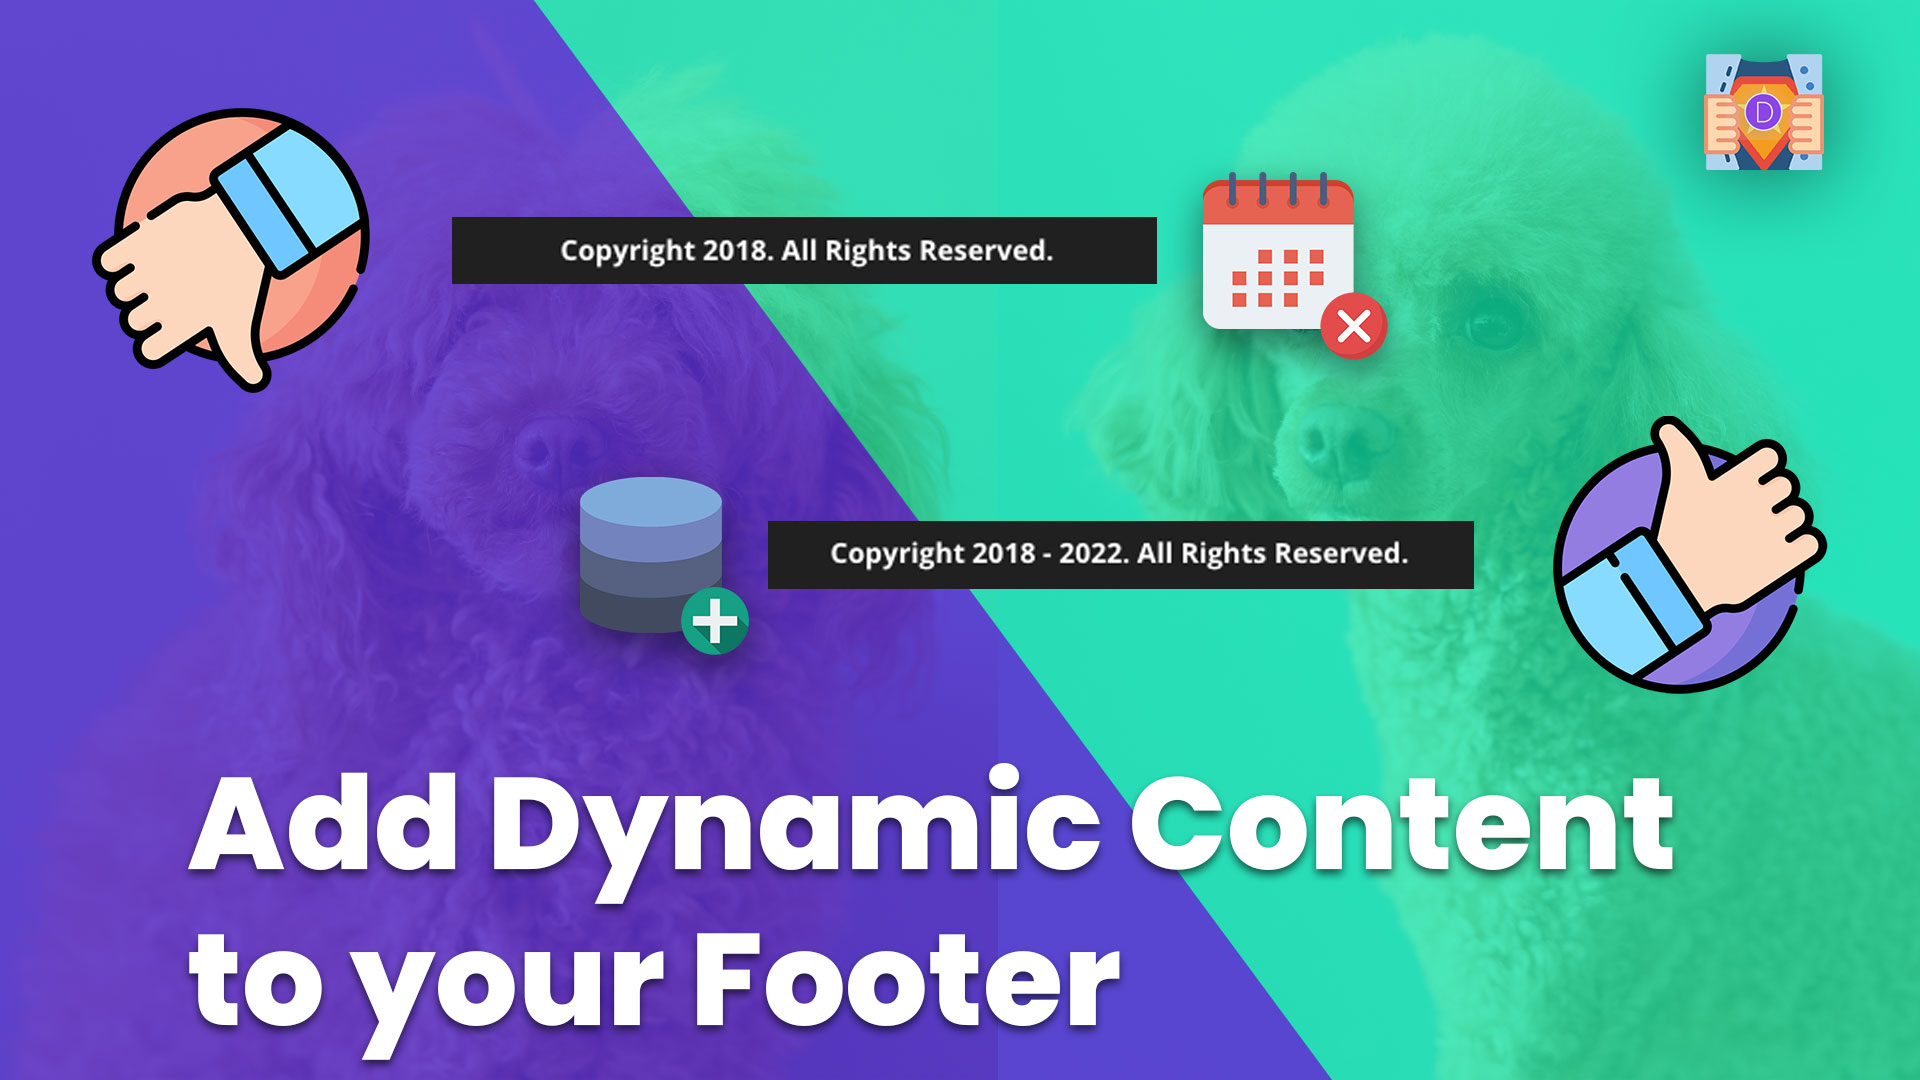 How to Add Dynamic Content to your Global Footer in Divi using the Theme Builder